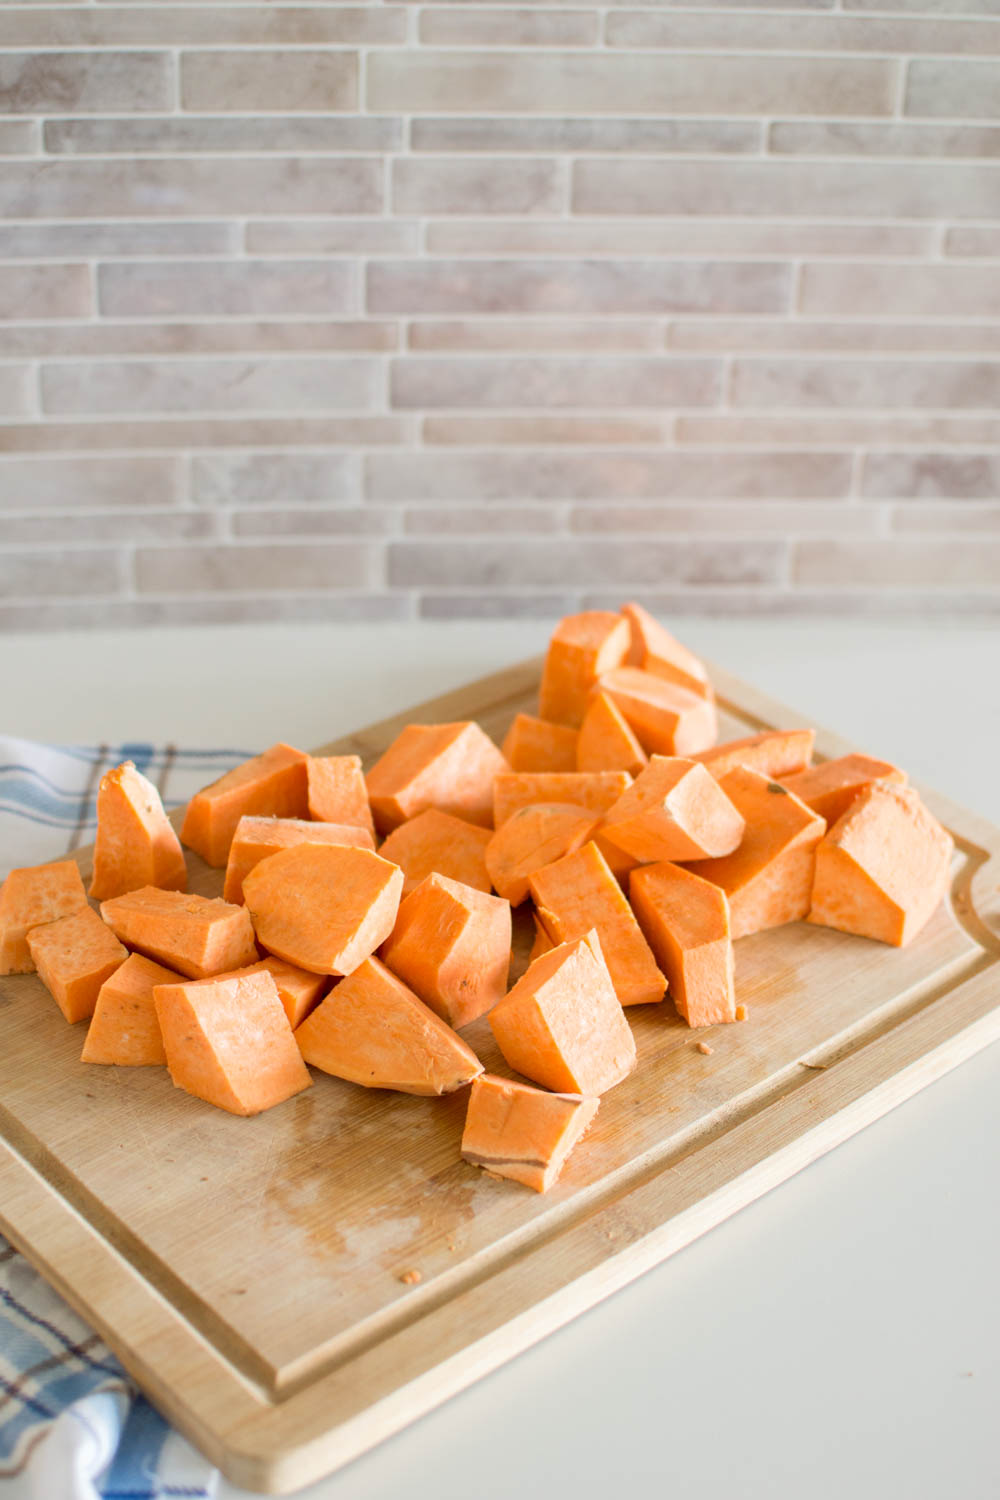 Sweet potatoes cubed on a wooden cutting board